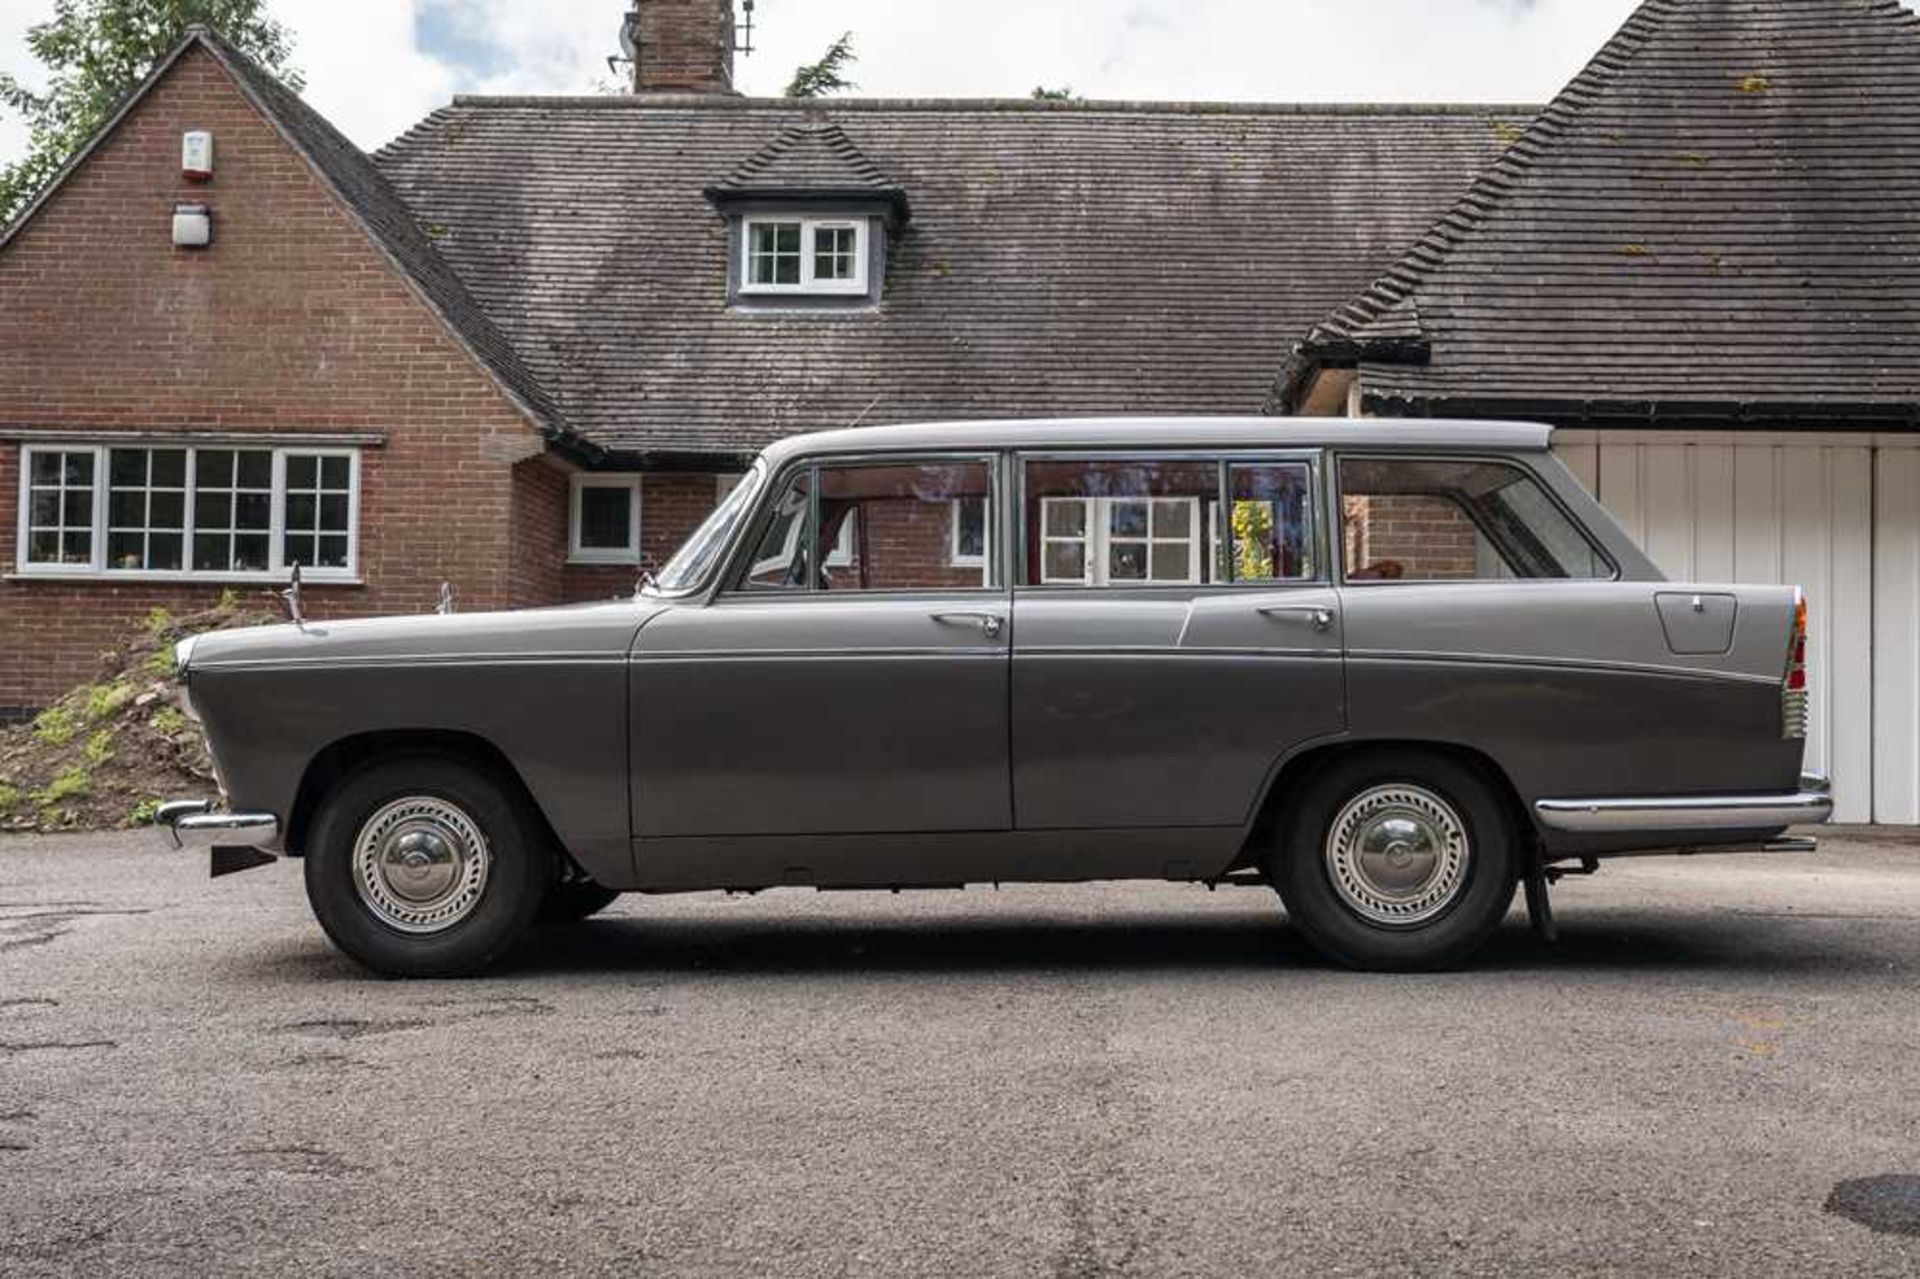 1964 Morris Oxford Series VI Farina Traveller Just 7,000 miles from new - Image 10 of 98